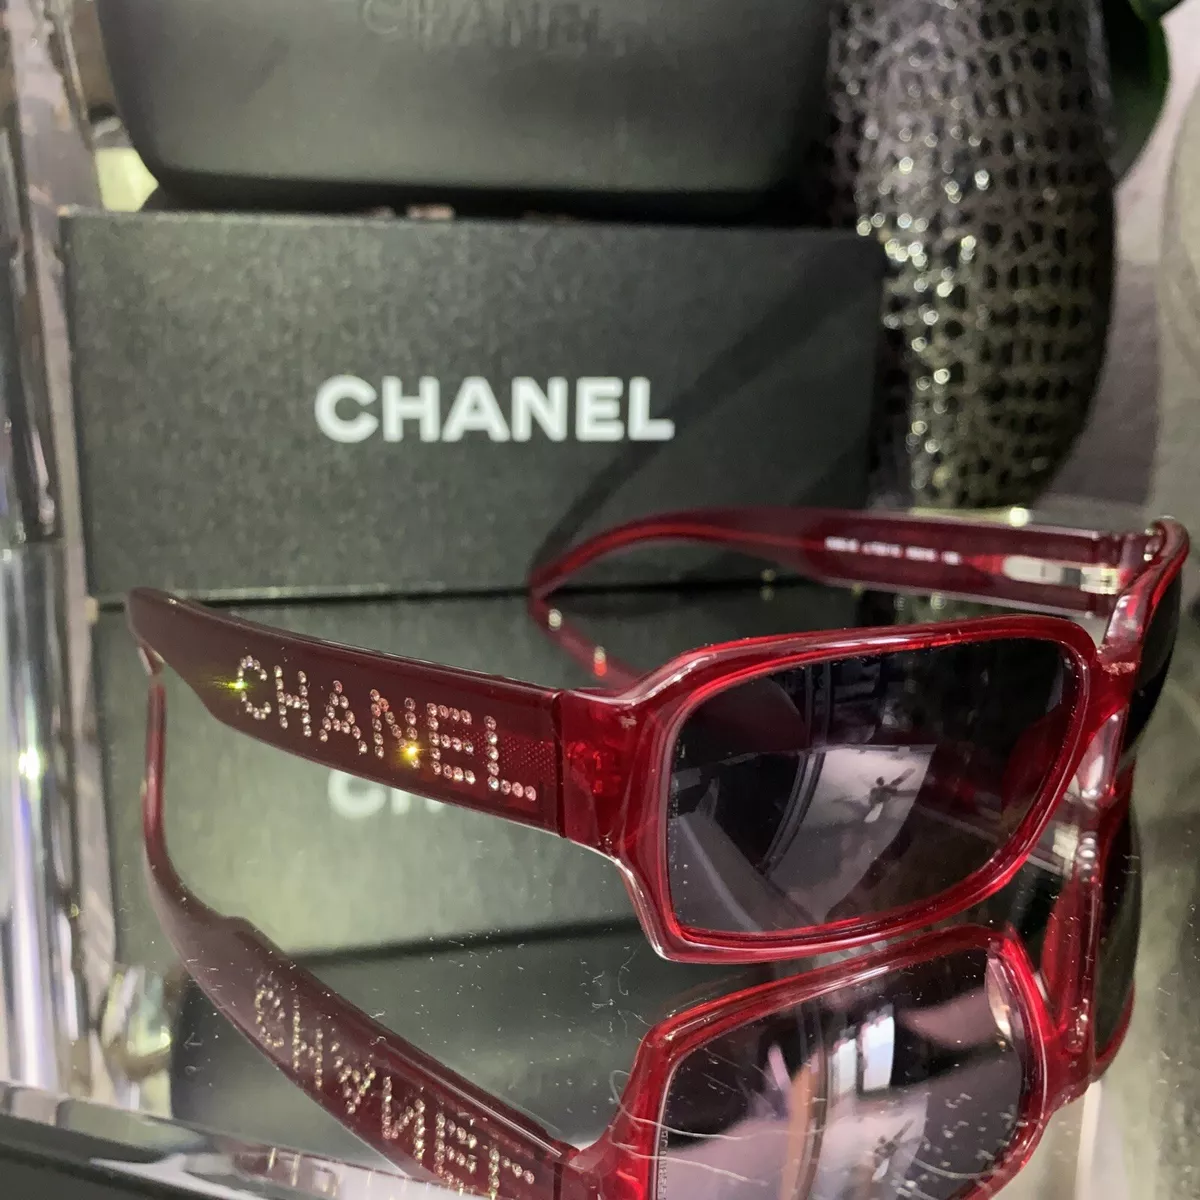 Vintage Chanel Red  Black Sunglasses  Tokyo Roses Vintage  Vintage chanel  Black sunglasses Vintage chanel clothing